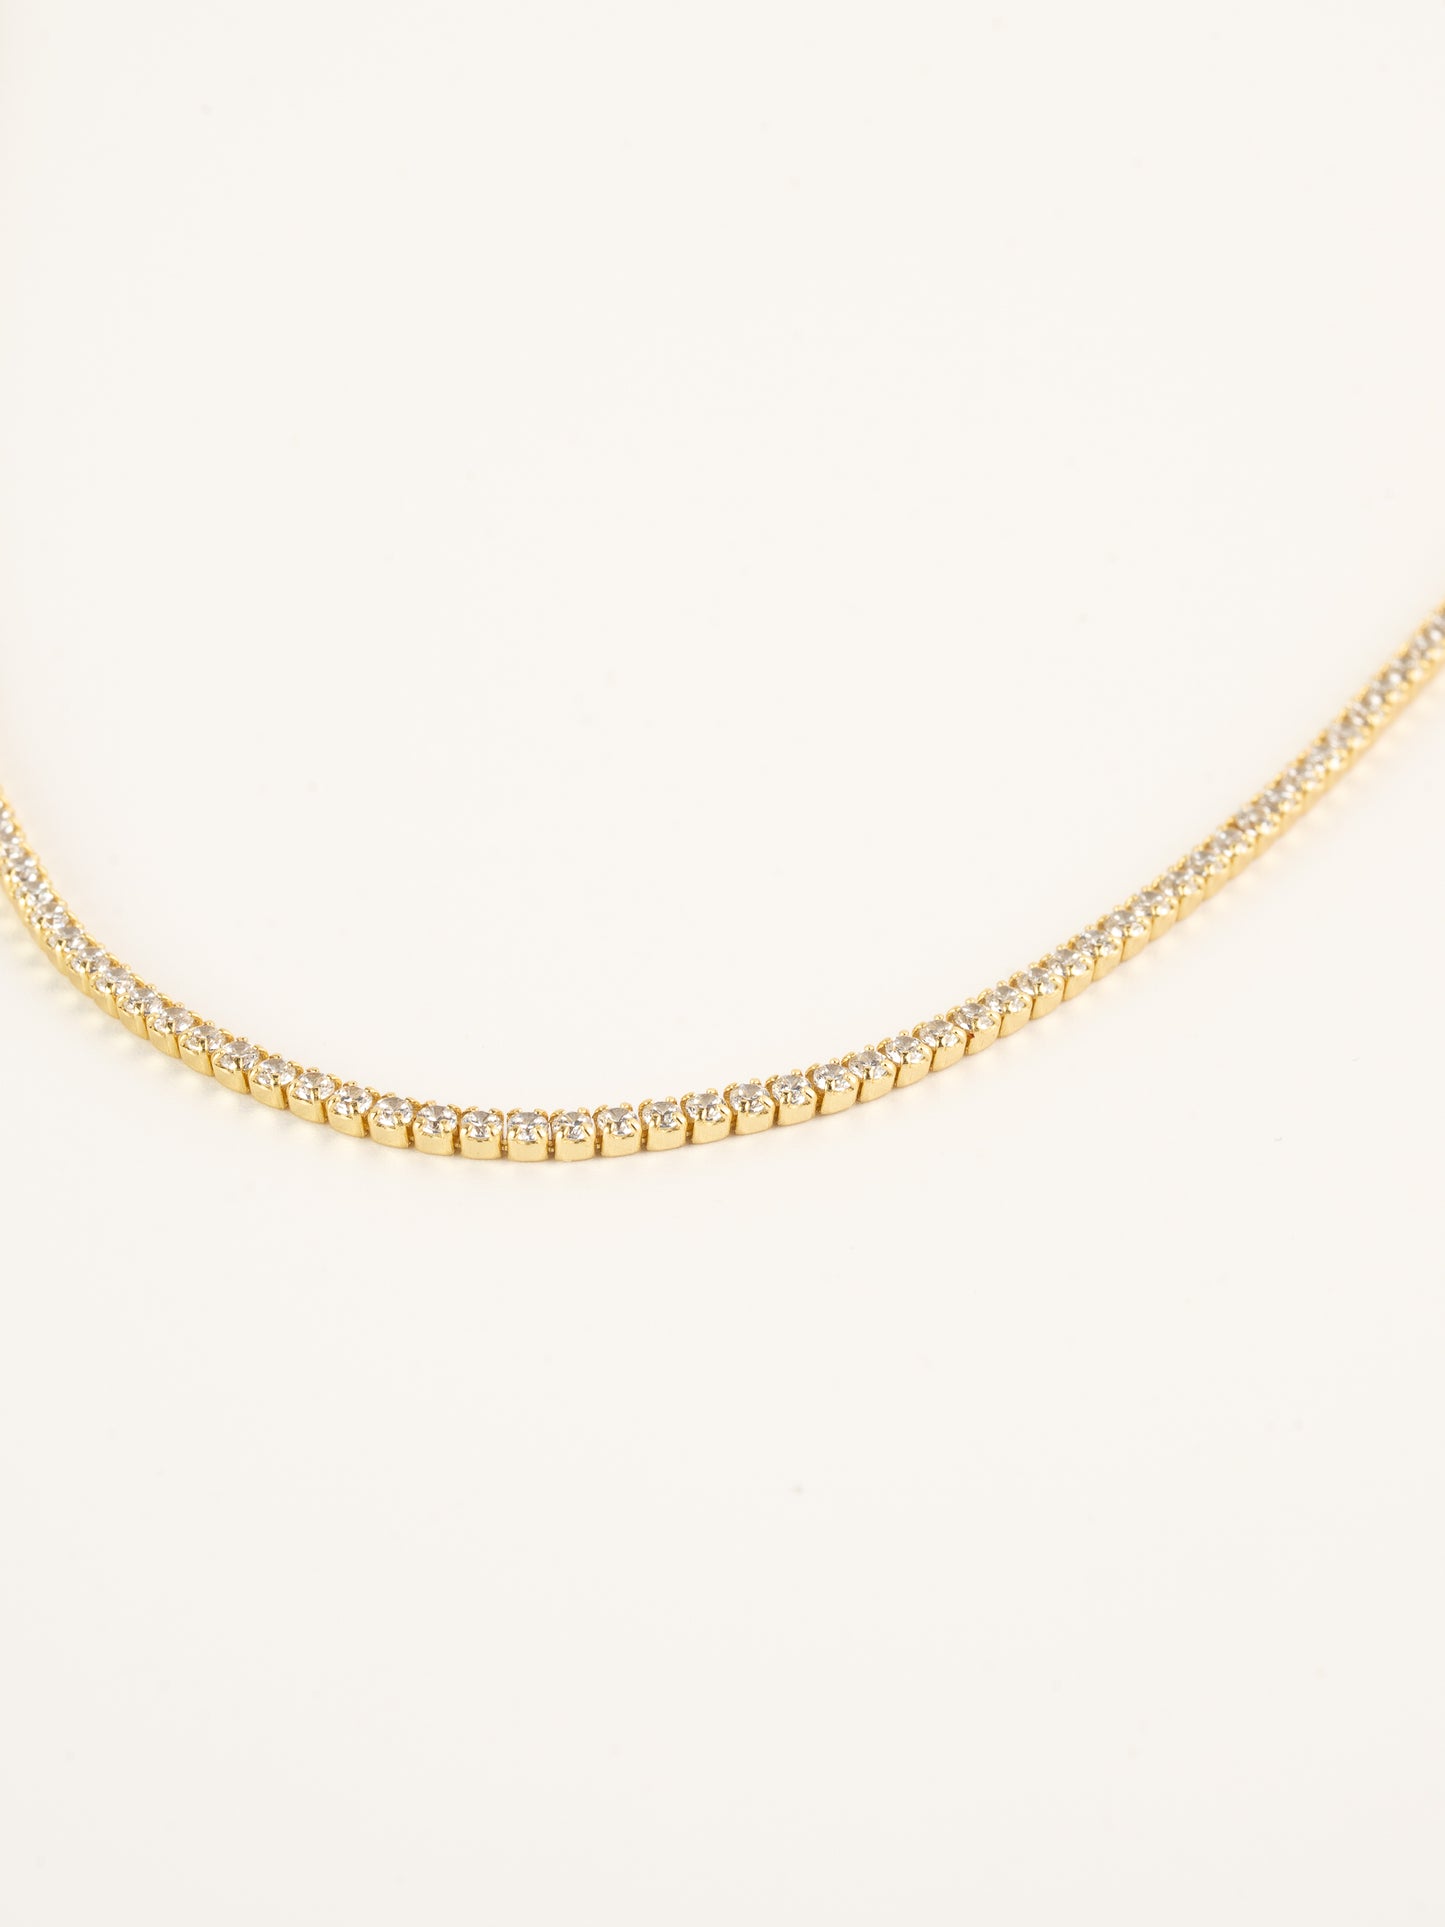 ATHENIAN RIVIERA GOLD-PLATED NECKLACE